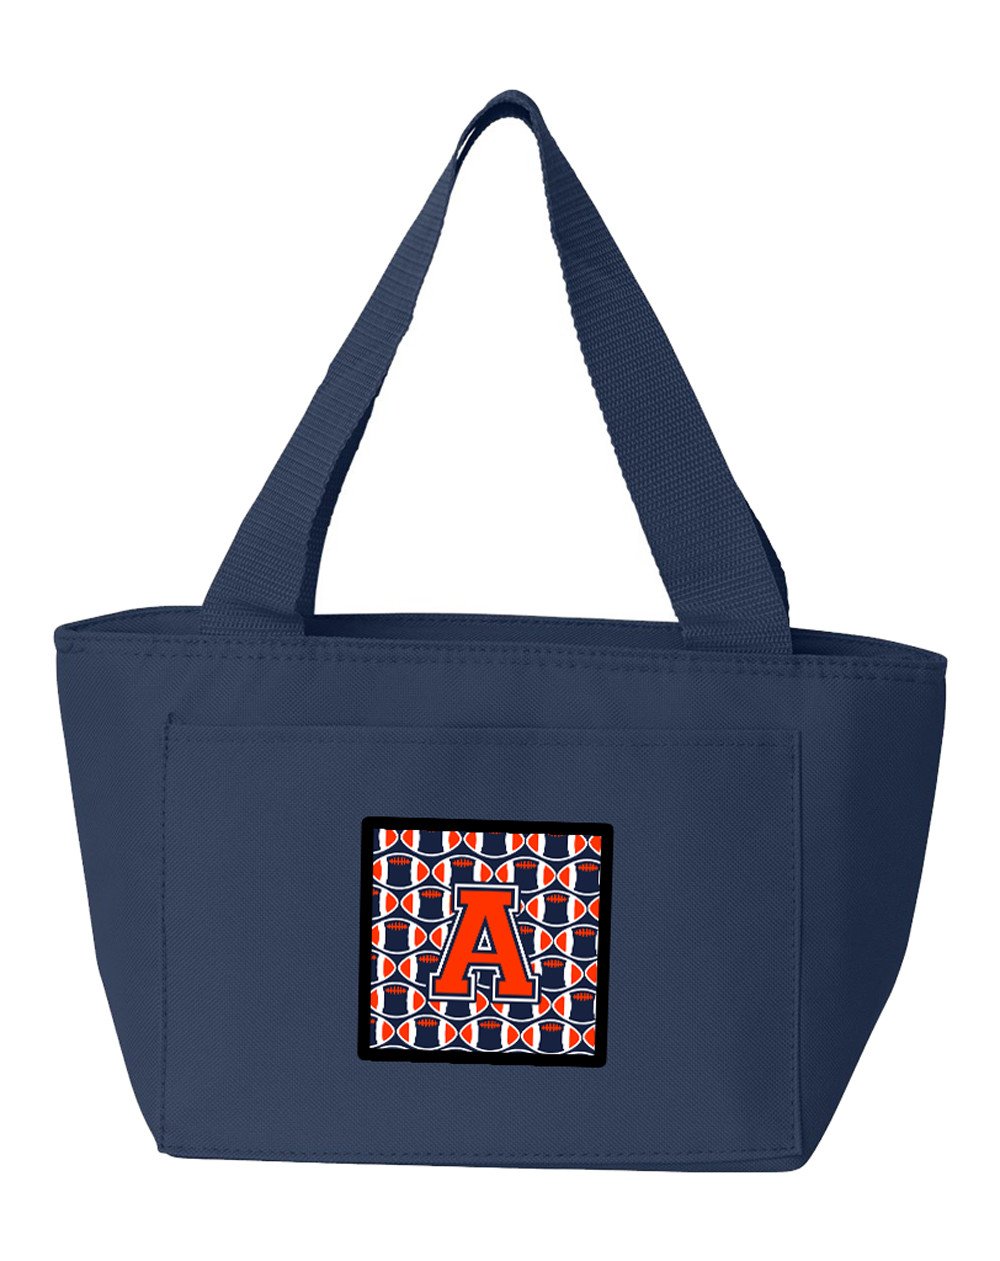 Letter A Football Orange, Blue and white Lunch Bag CJ1066-ANA-8808 by Caroline's Treasures